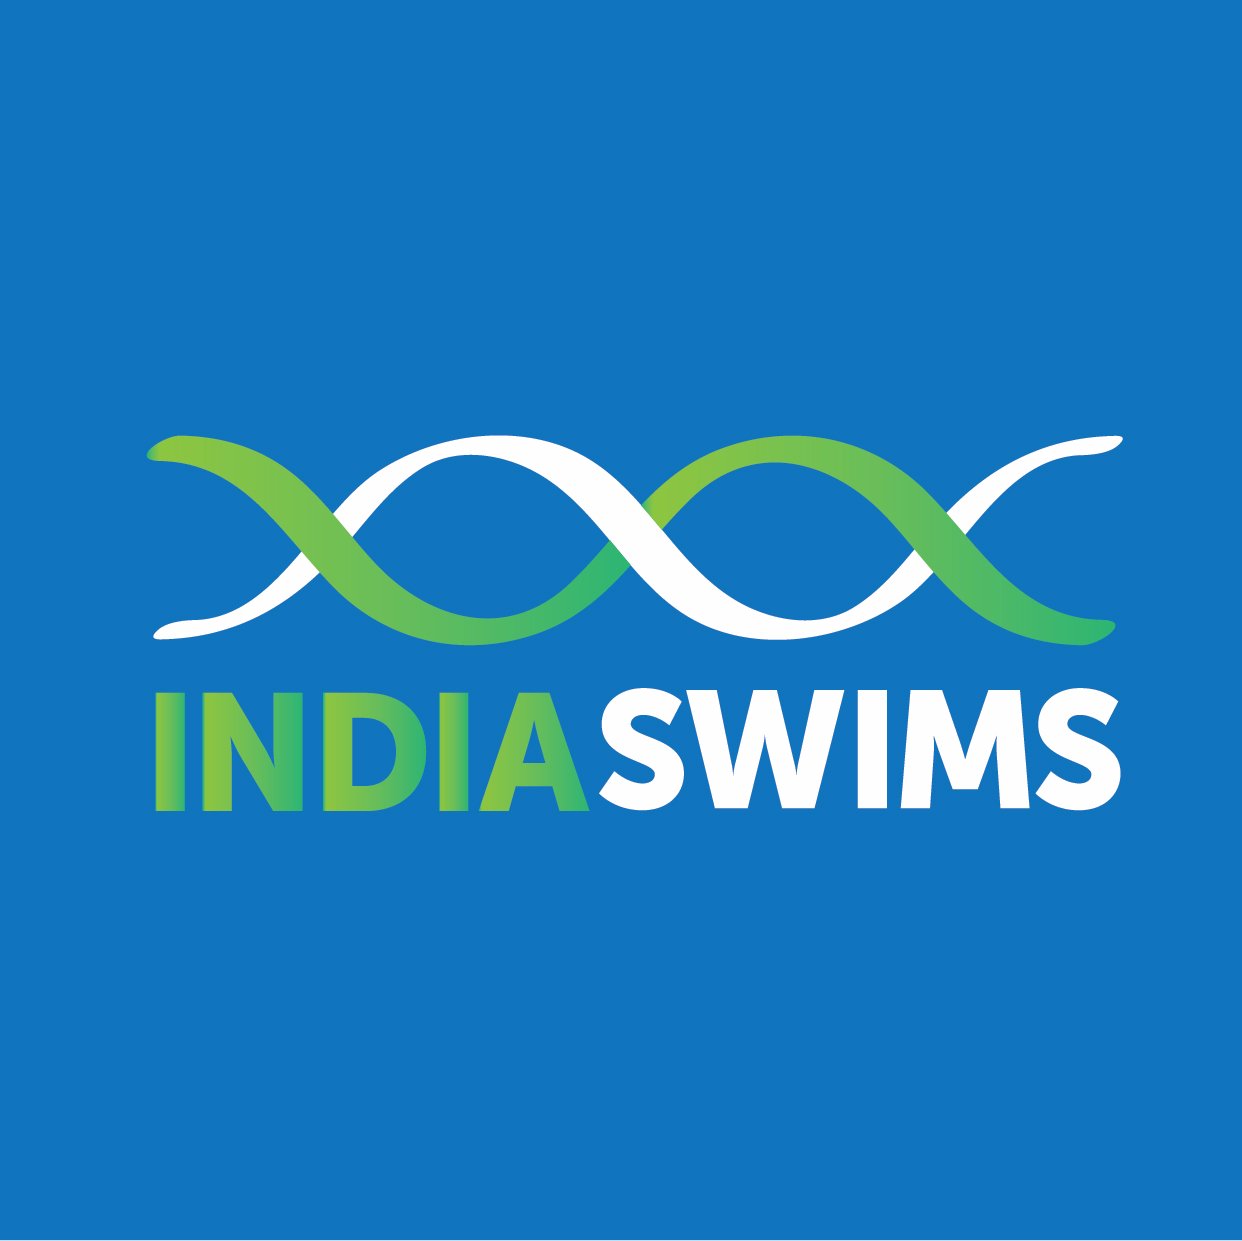 India SWIMS (Swimming & Water safety Is My Solution) to Prevent Drowning is an @IndianOlympians project supported by @WorldOlympians Service to Society Grant